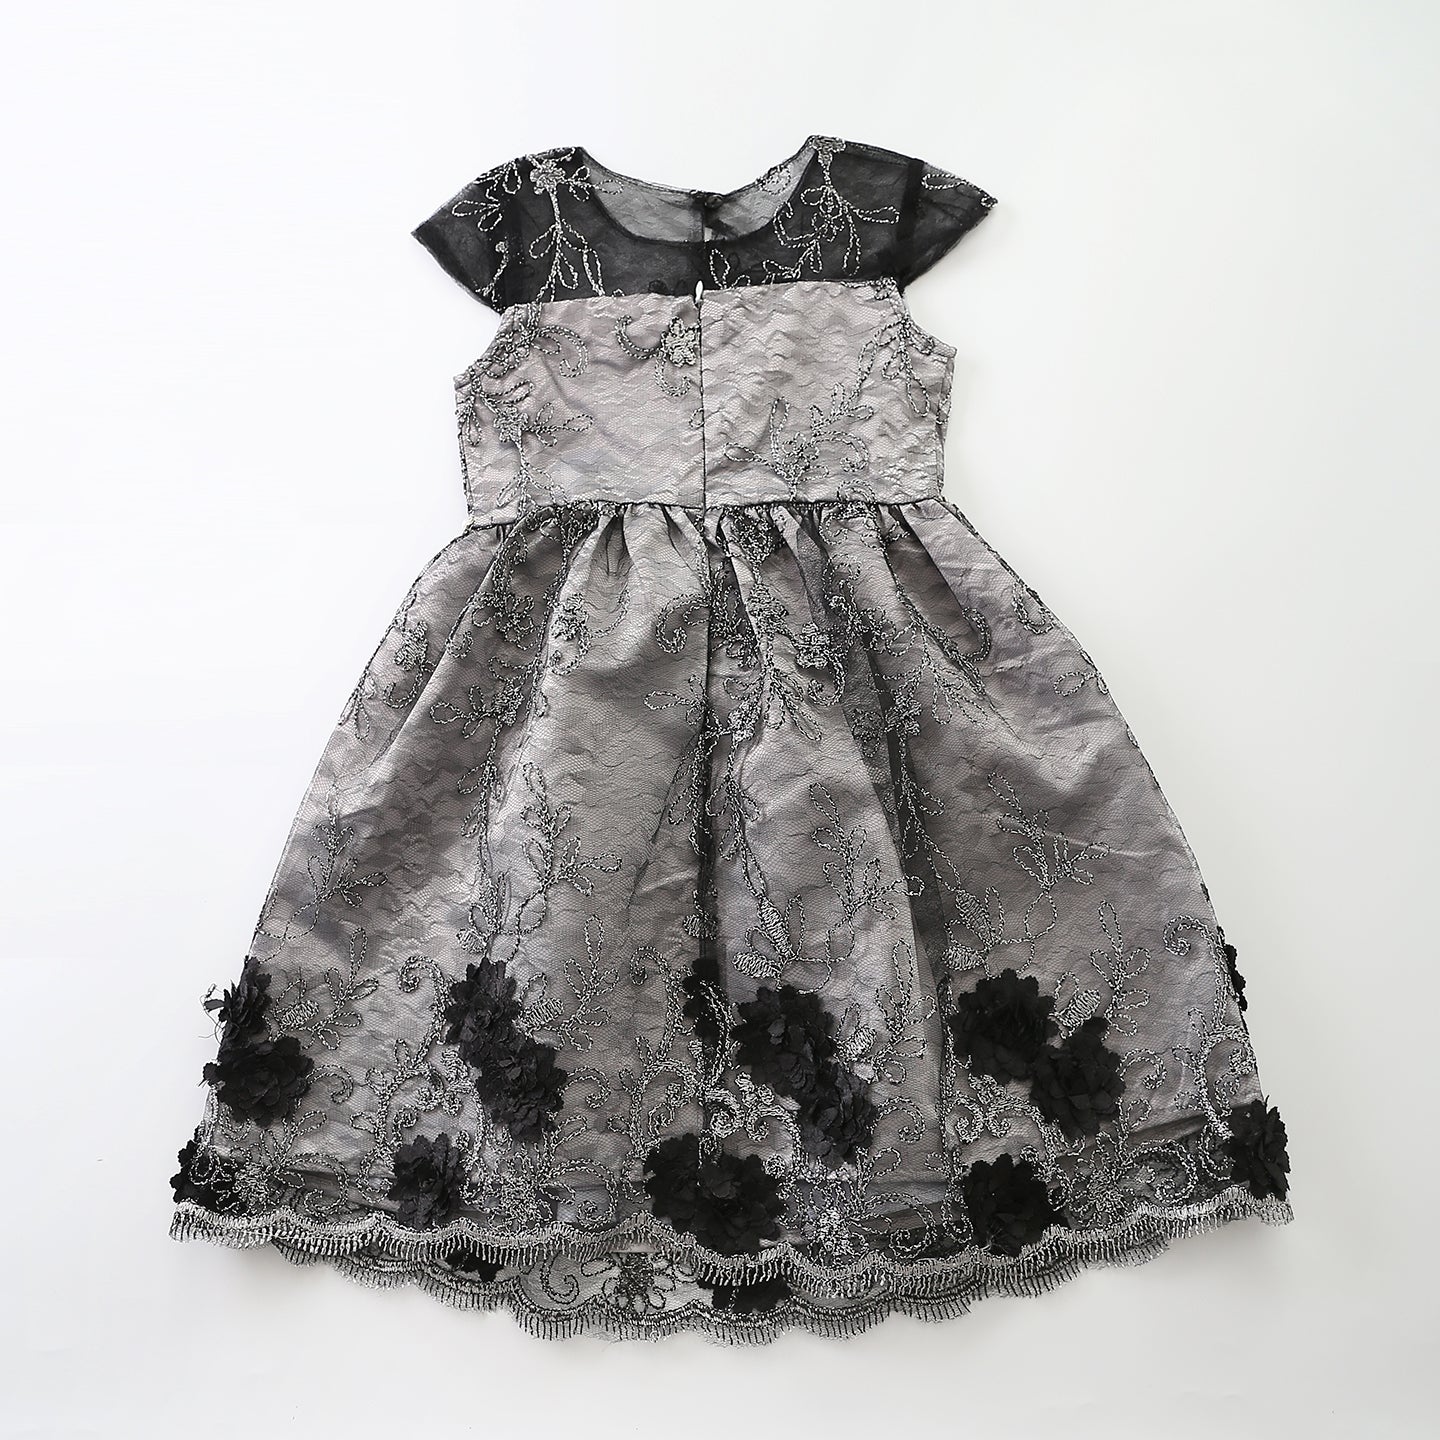 Older Girls Special Occasion Black and White Formal Dress